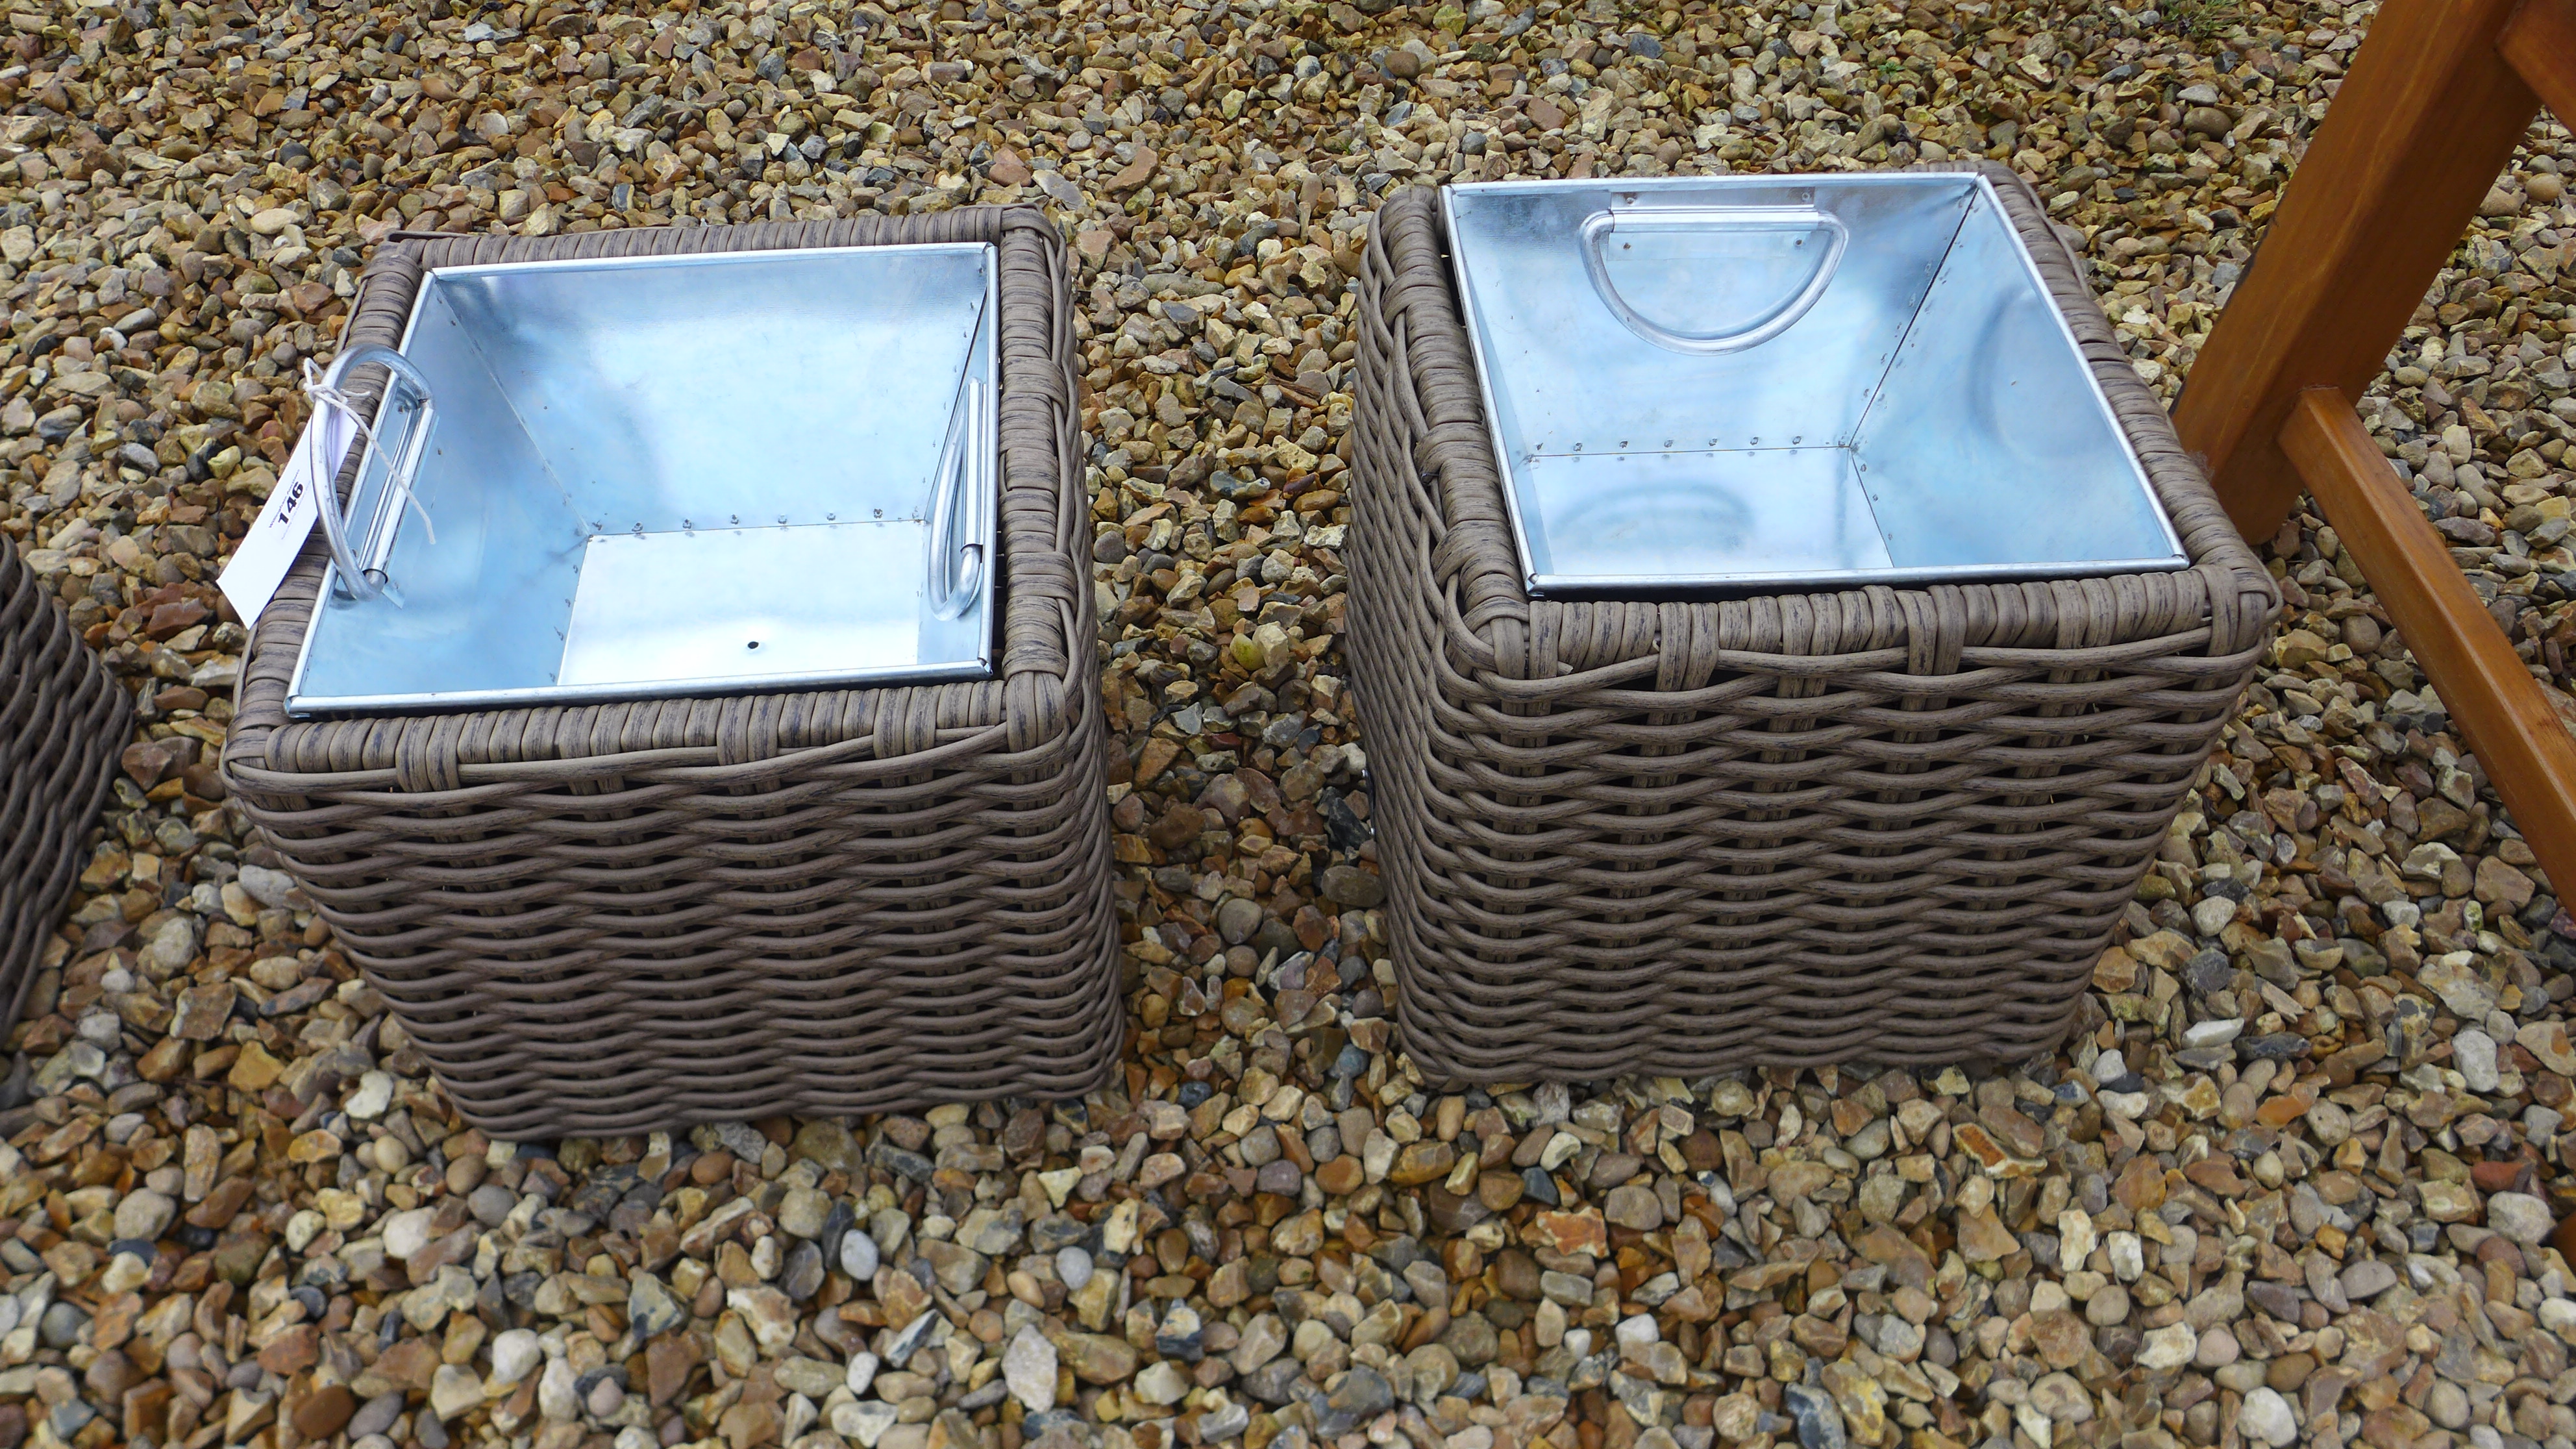 A pair of Bramblecrest small planters with zinc containers